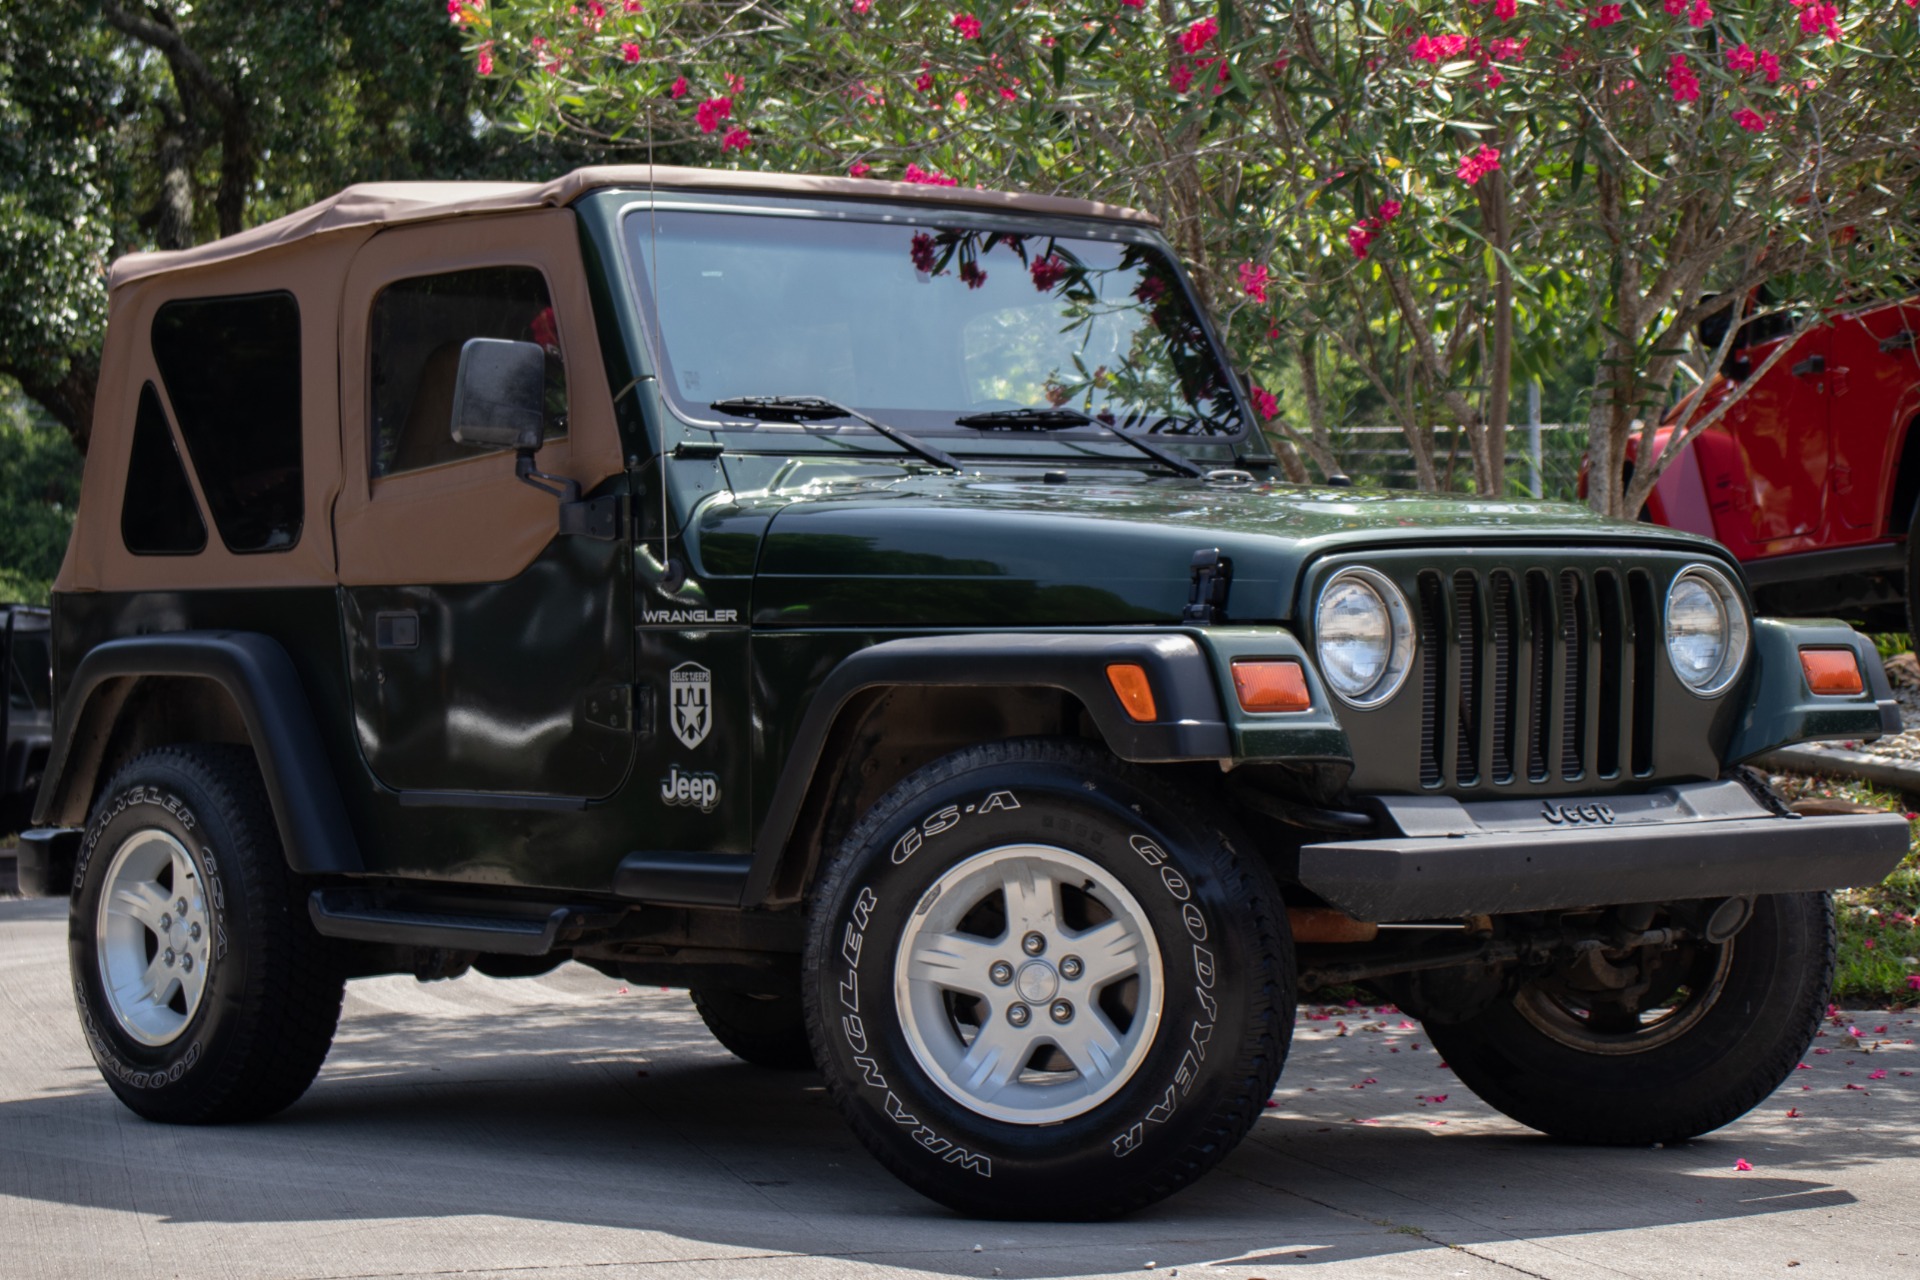 Used 1997 Jeep Wrangler SE For Sale ($11,995) | Select Jeeps Inc. Stock  #472727